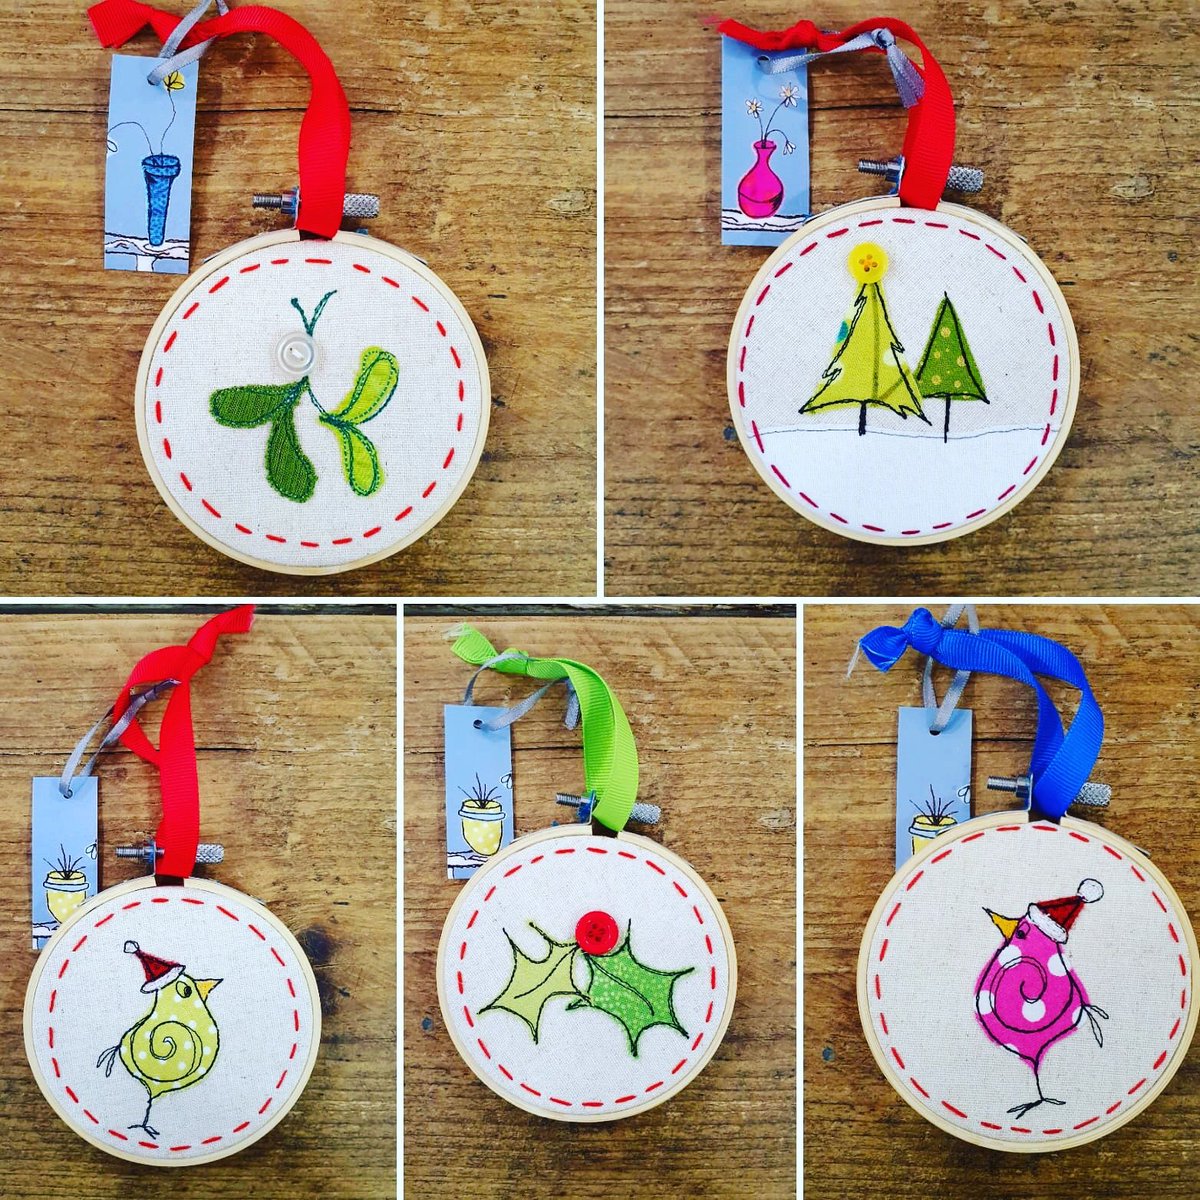 Beautiful #sarahamescreativethreads #christmas #decorations available in both #CherrydidiAmbleside & #CherrydidiKeswick! Pop in or give us a call on 01768771170 to get yours! 
#localartist #handmade 
@LiveShopLocal @LakesPound @NotJustLakes @hmuk_crafters